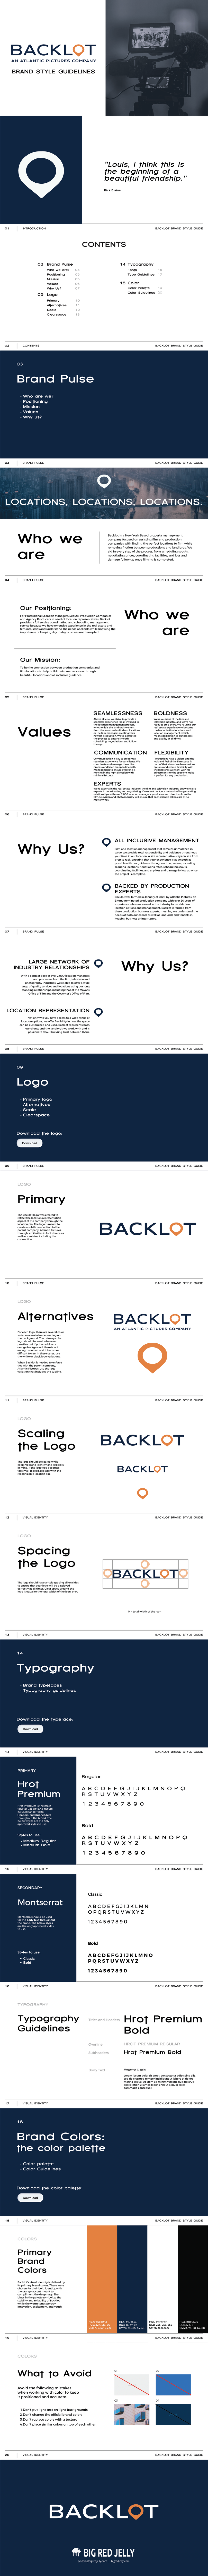 Backlot full brand style guide mockup - new brand development by Big Red Jelly.